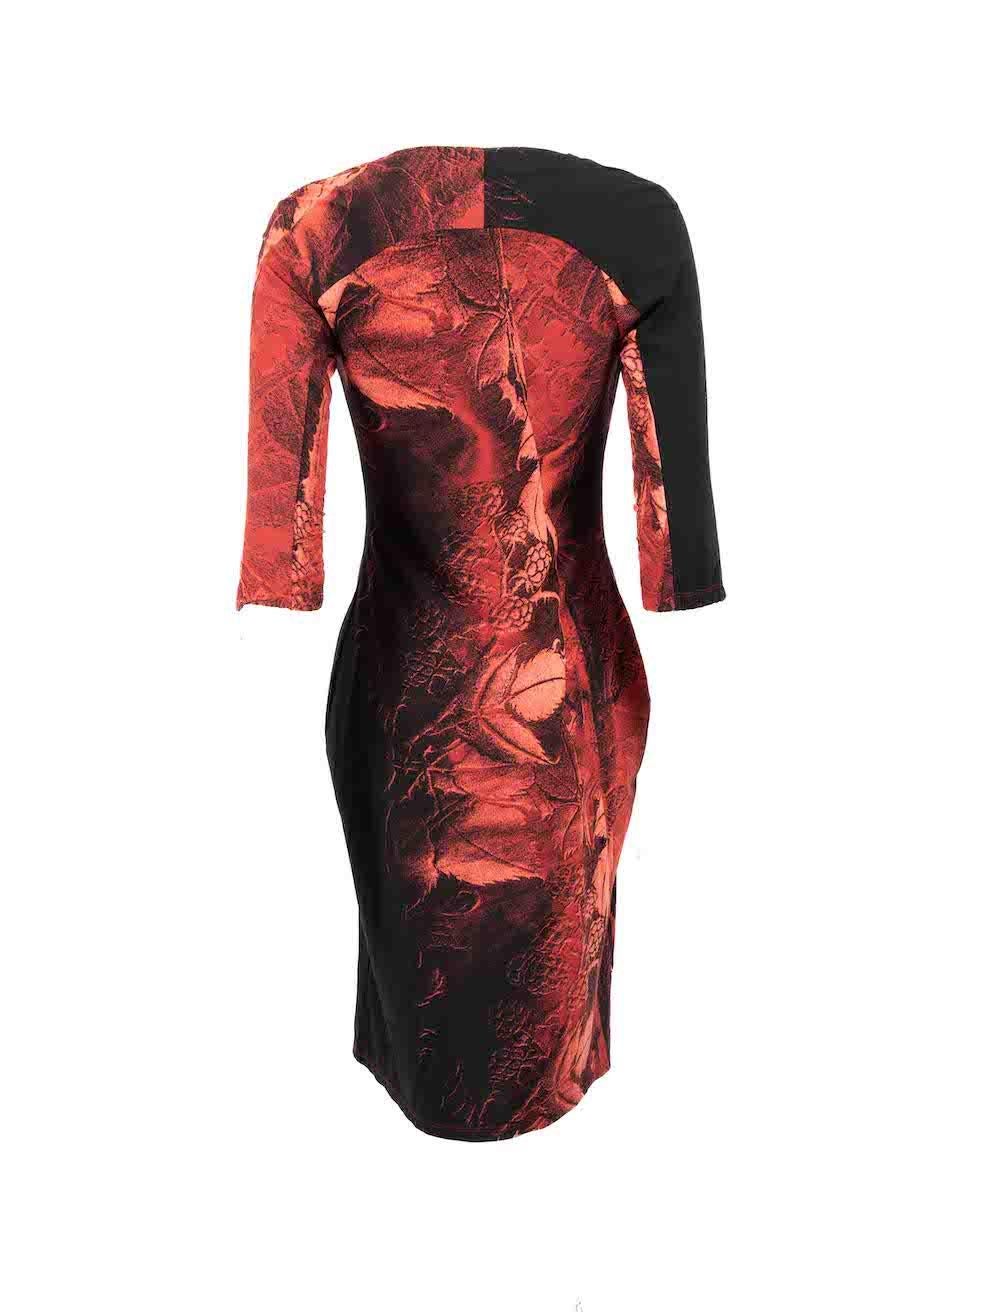 Roberto Cavalli Printed Pattern Mid Sleeves Dress Size S In Excellent Condition For Sale In London, GB